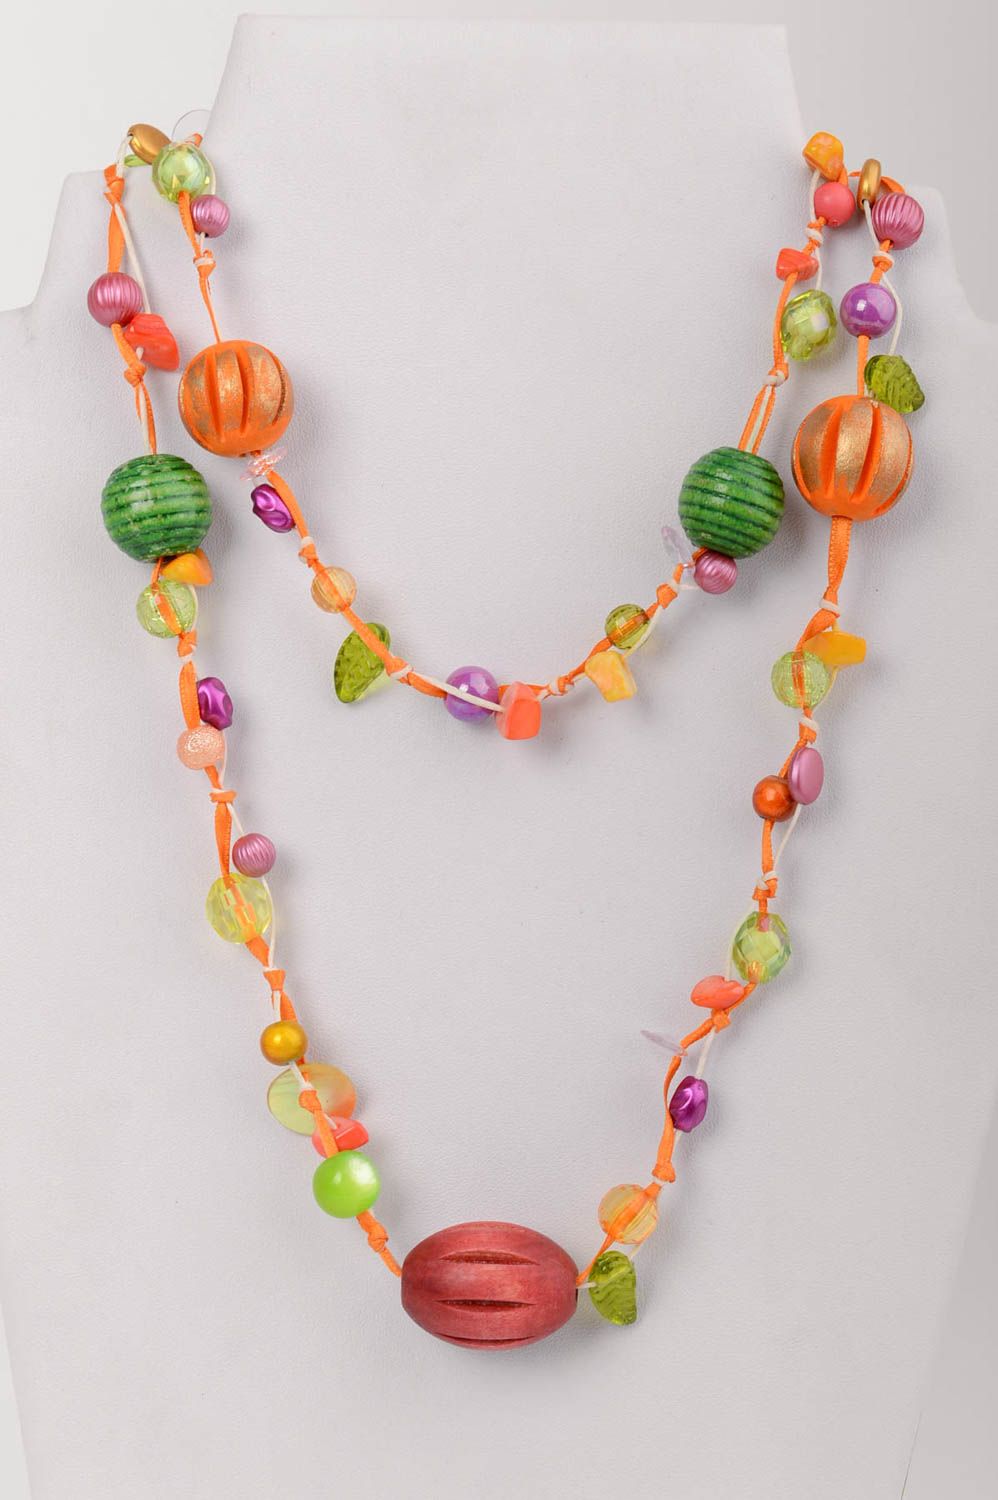 Handmade long designer necklace with colorful wooden and plastic beads photo 1